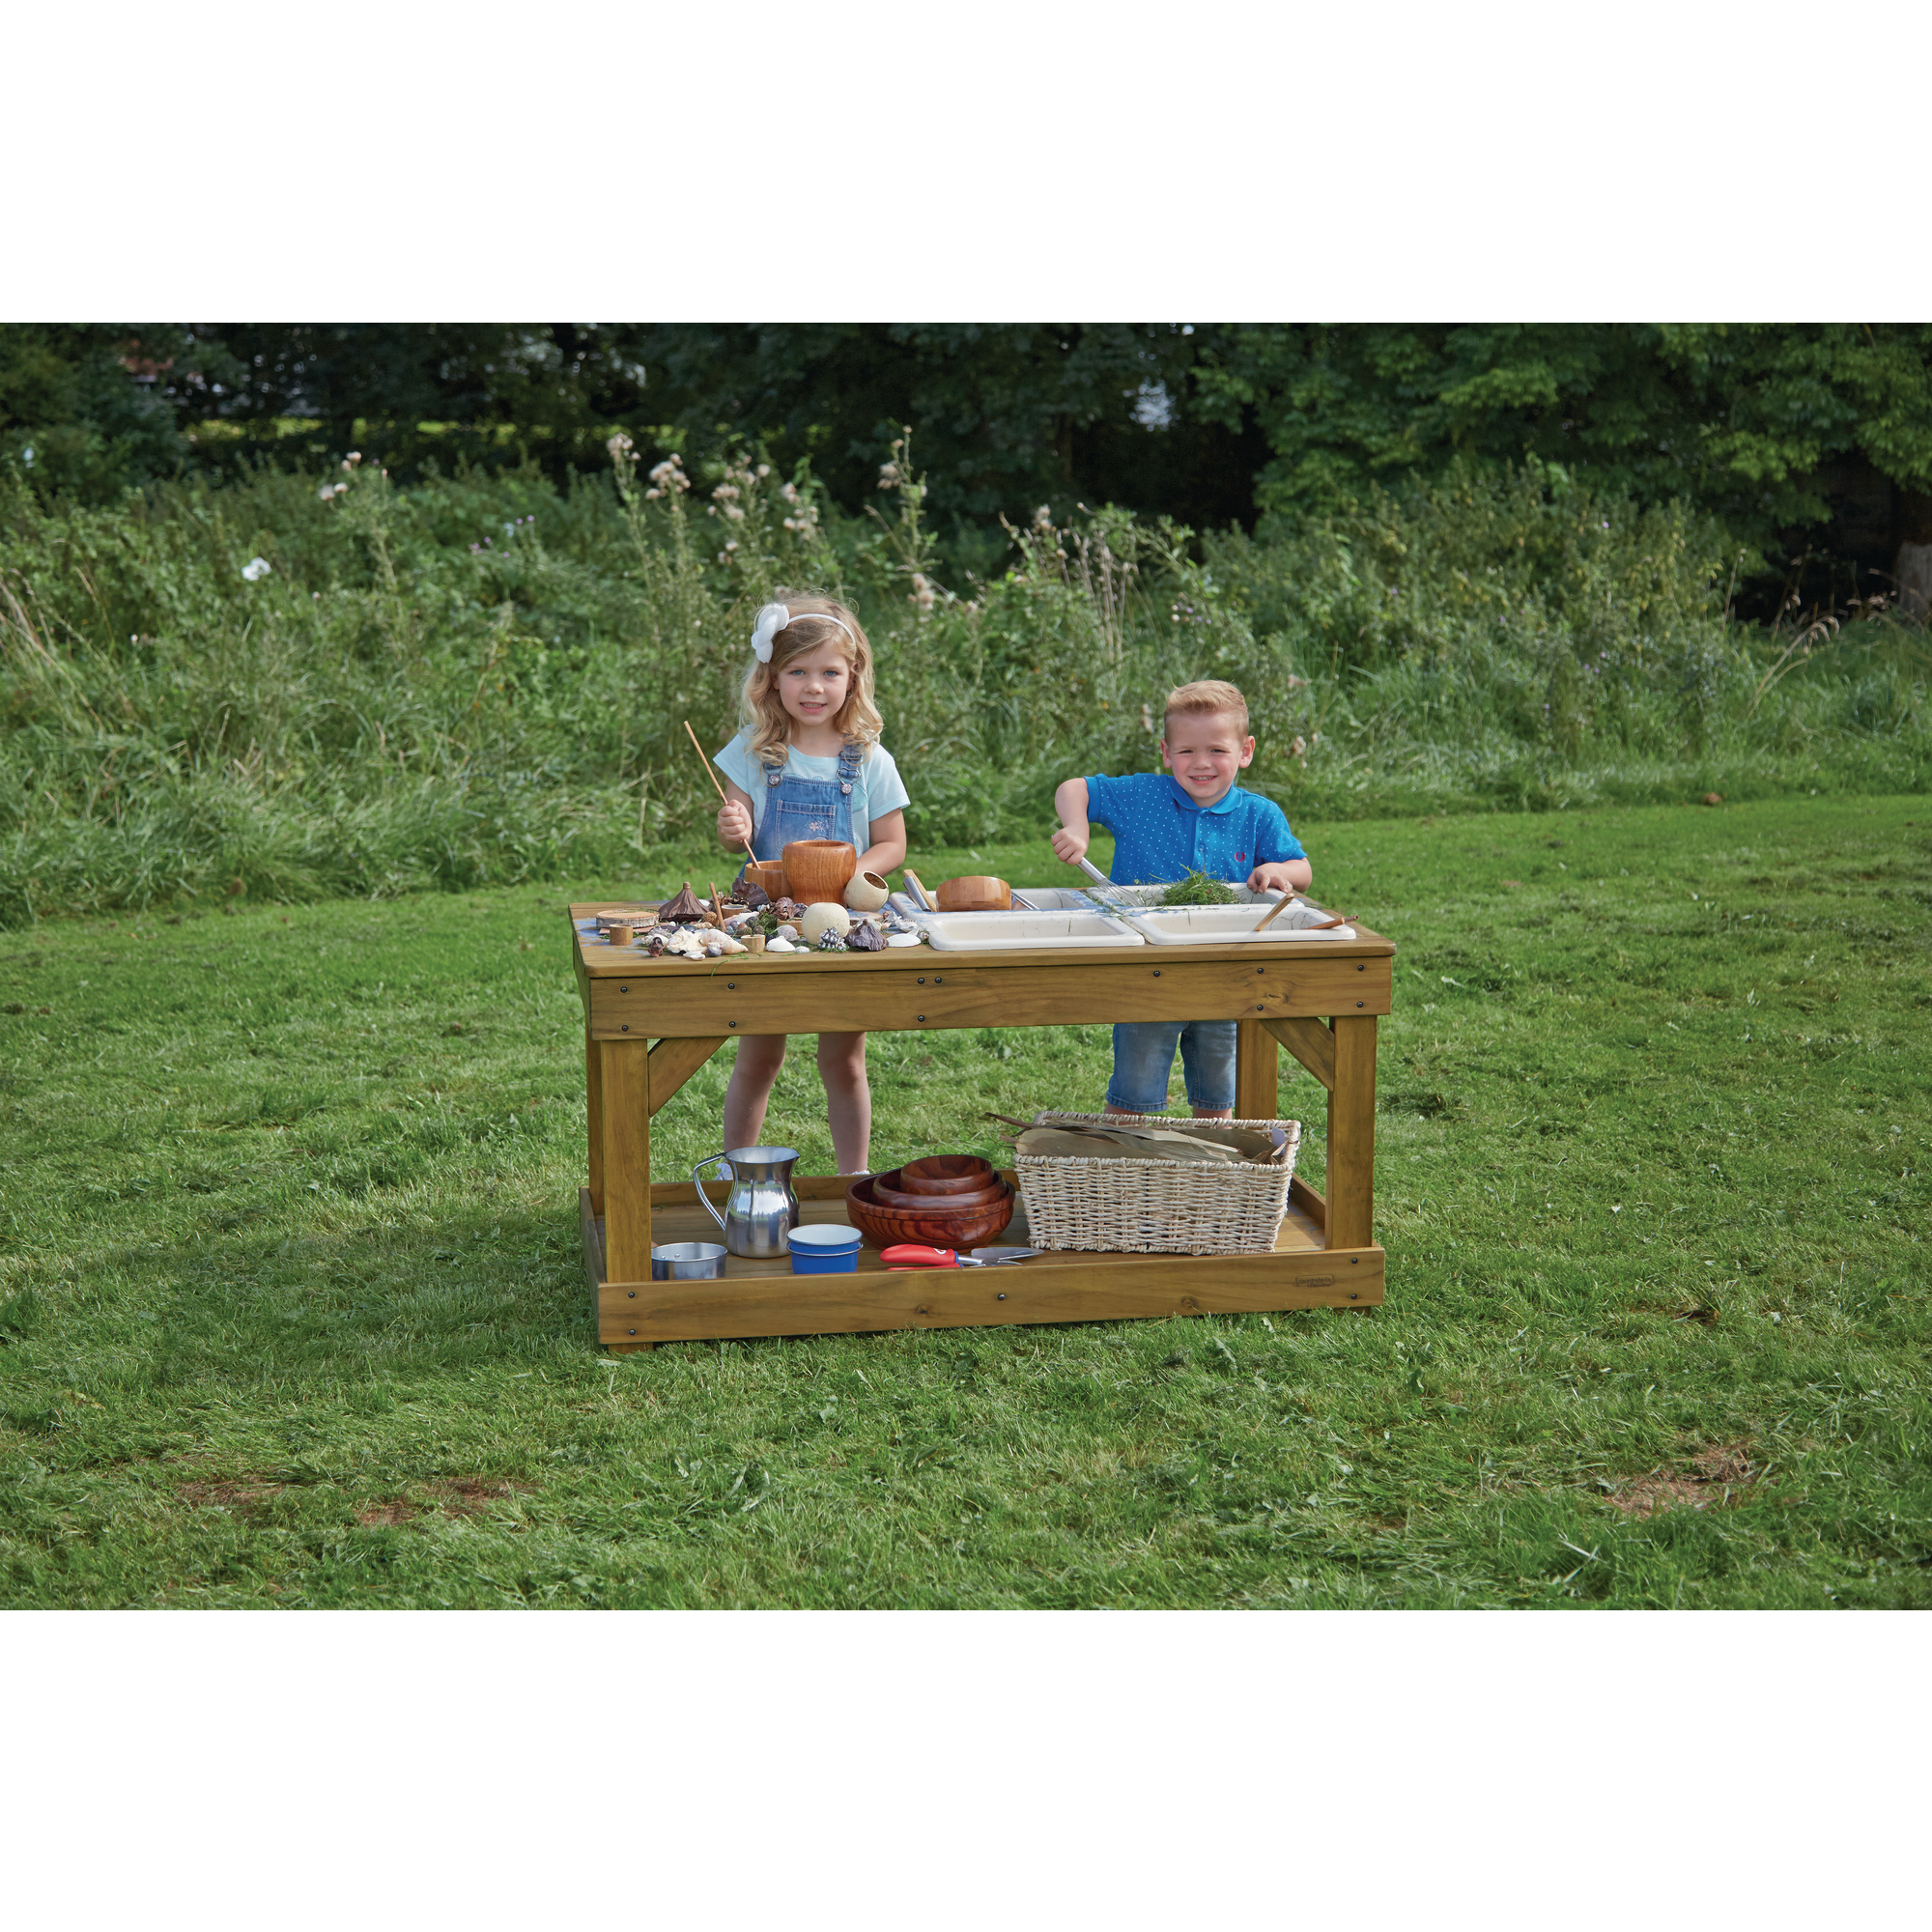 Outdoor Messy Play Table